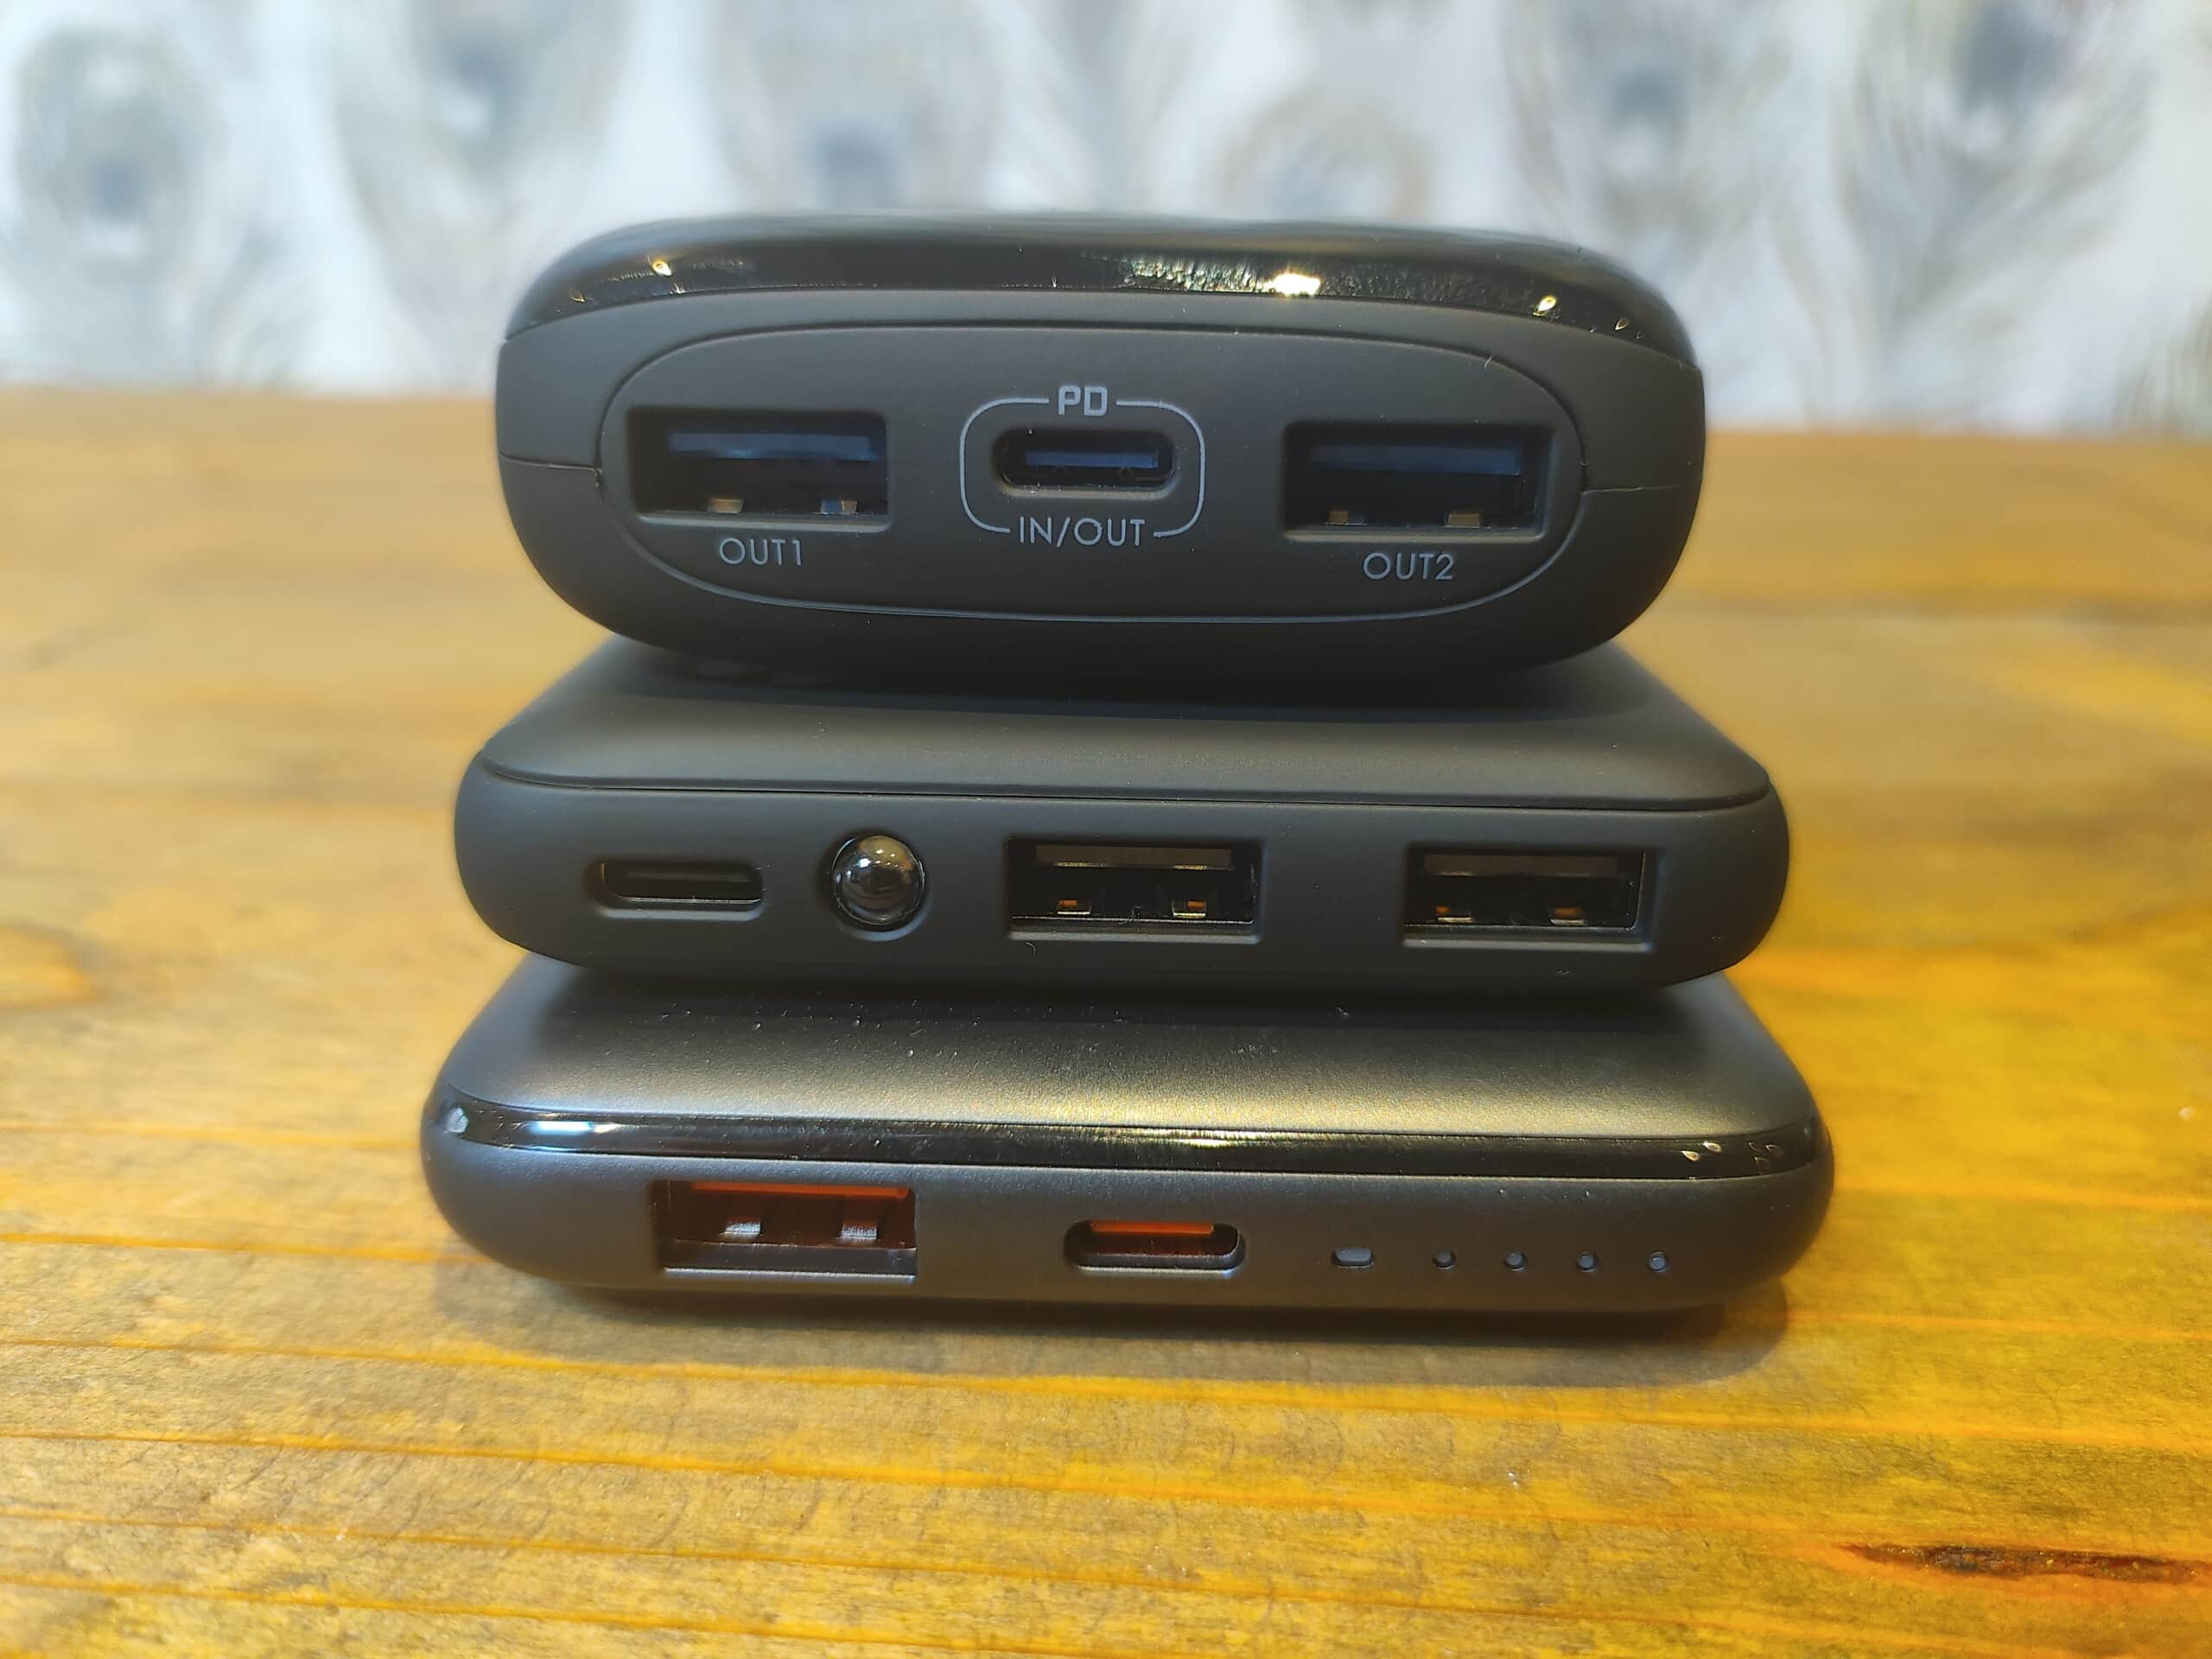 INIU Power Bank Review1 scaled